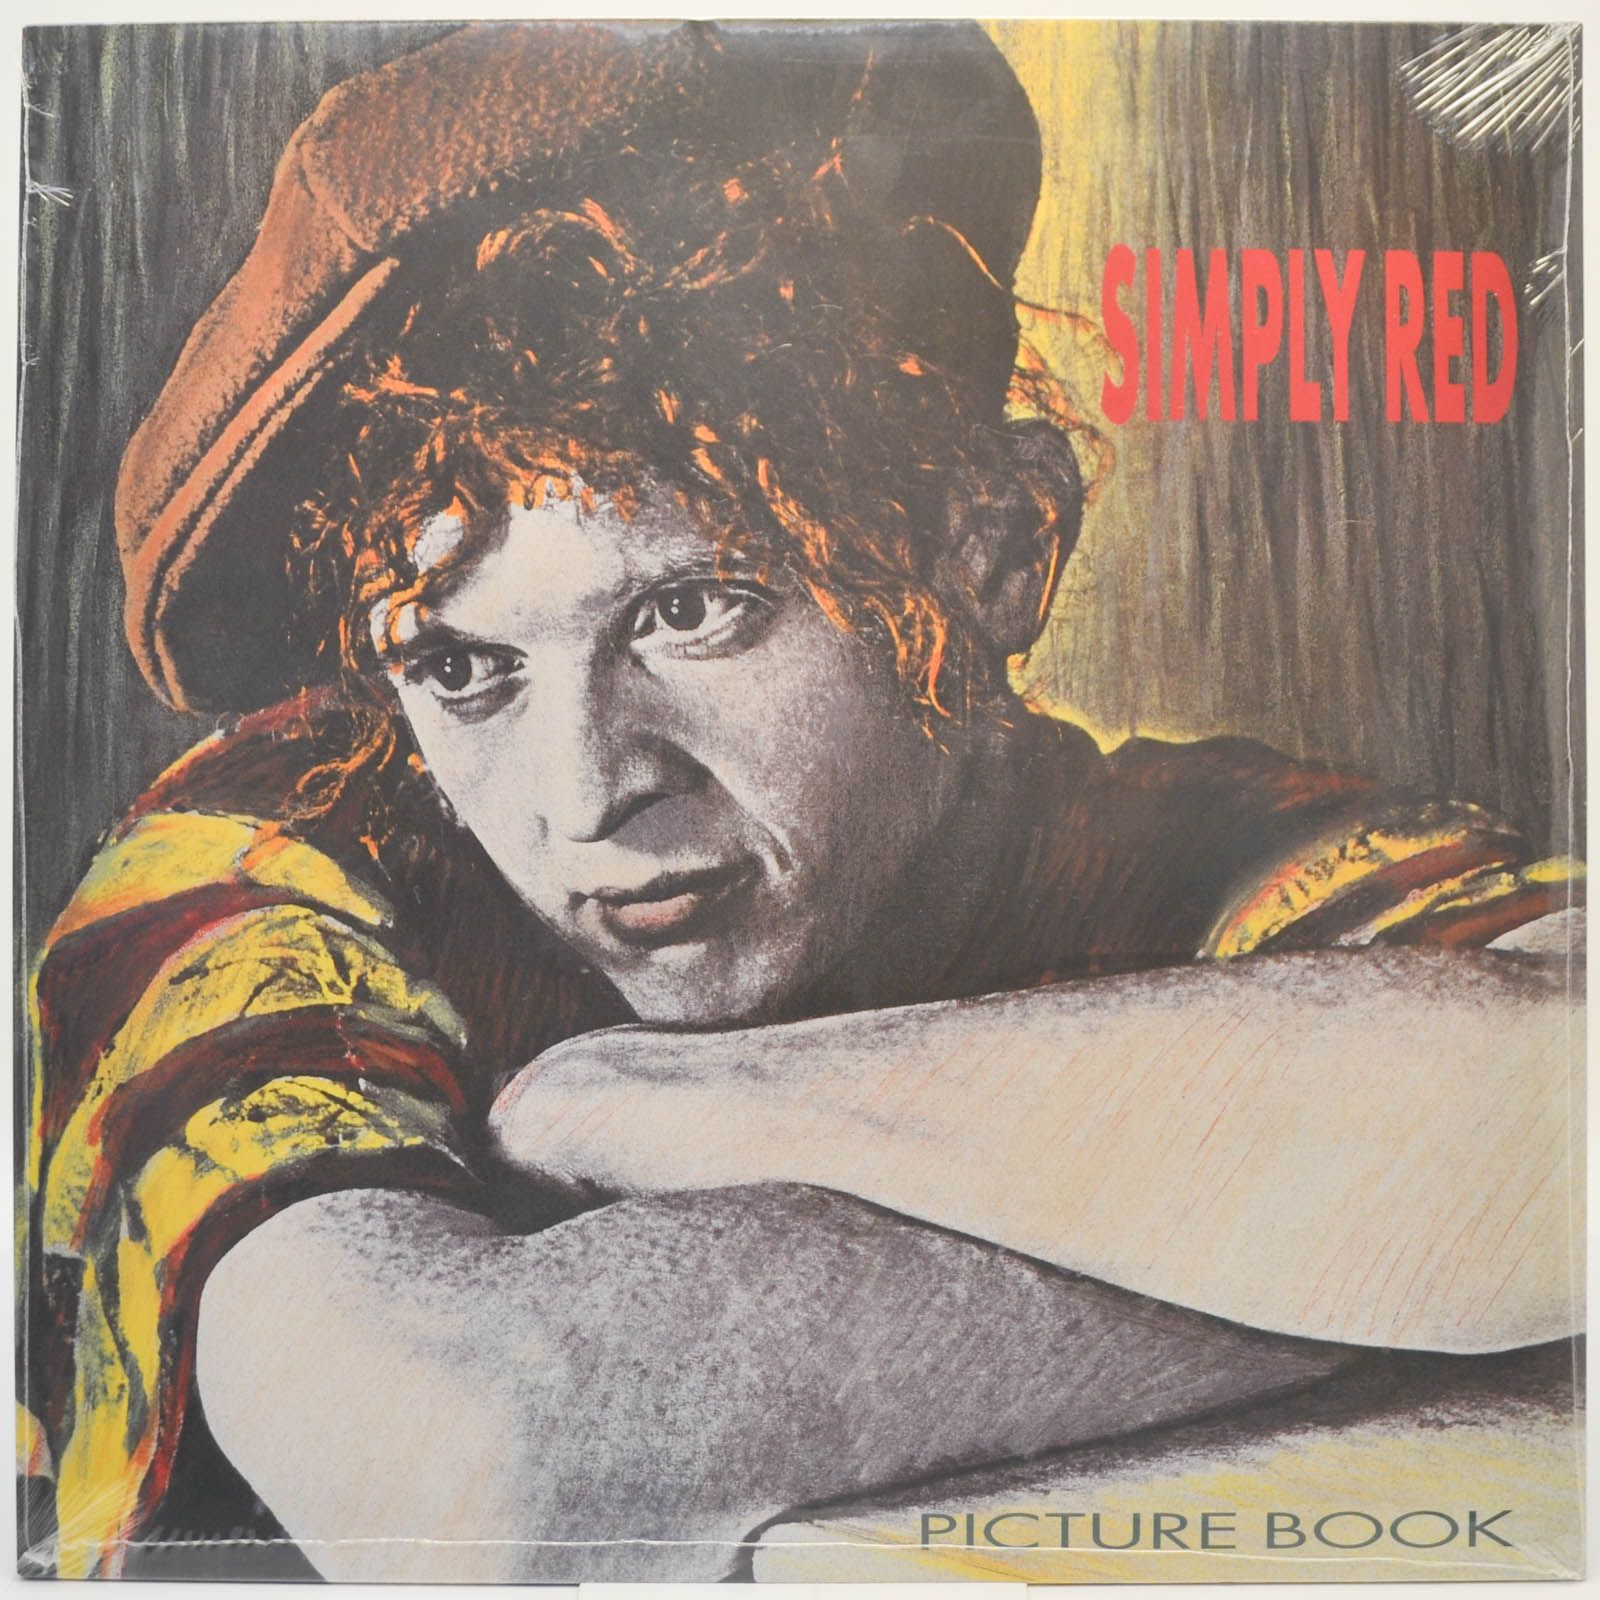 Simply Red — Picture Book, 1985